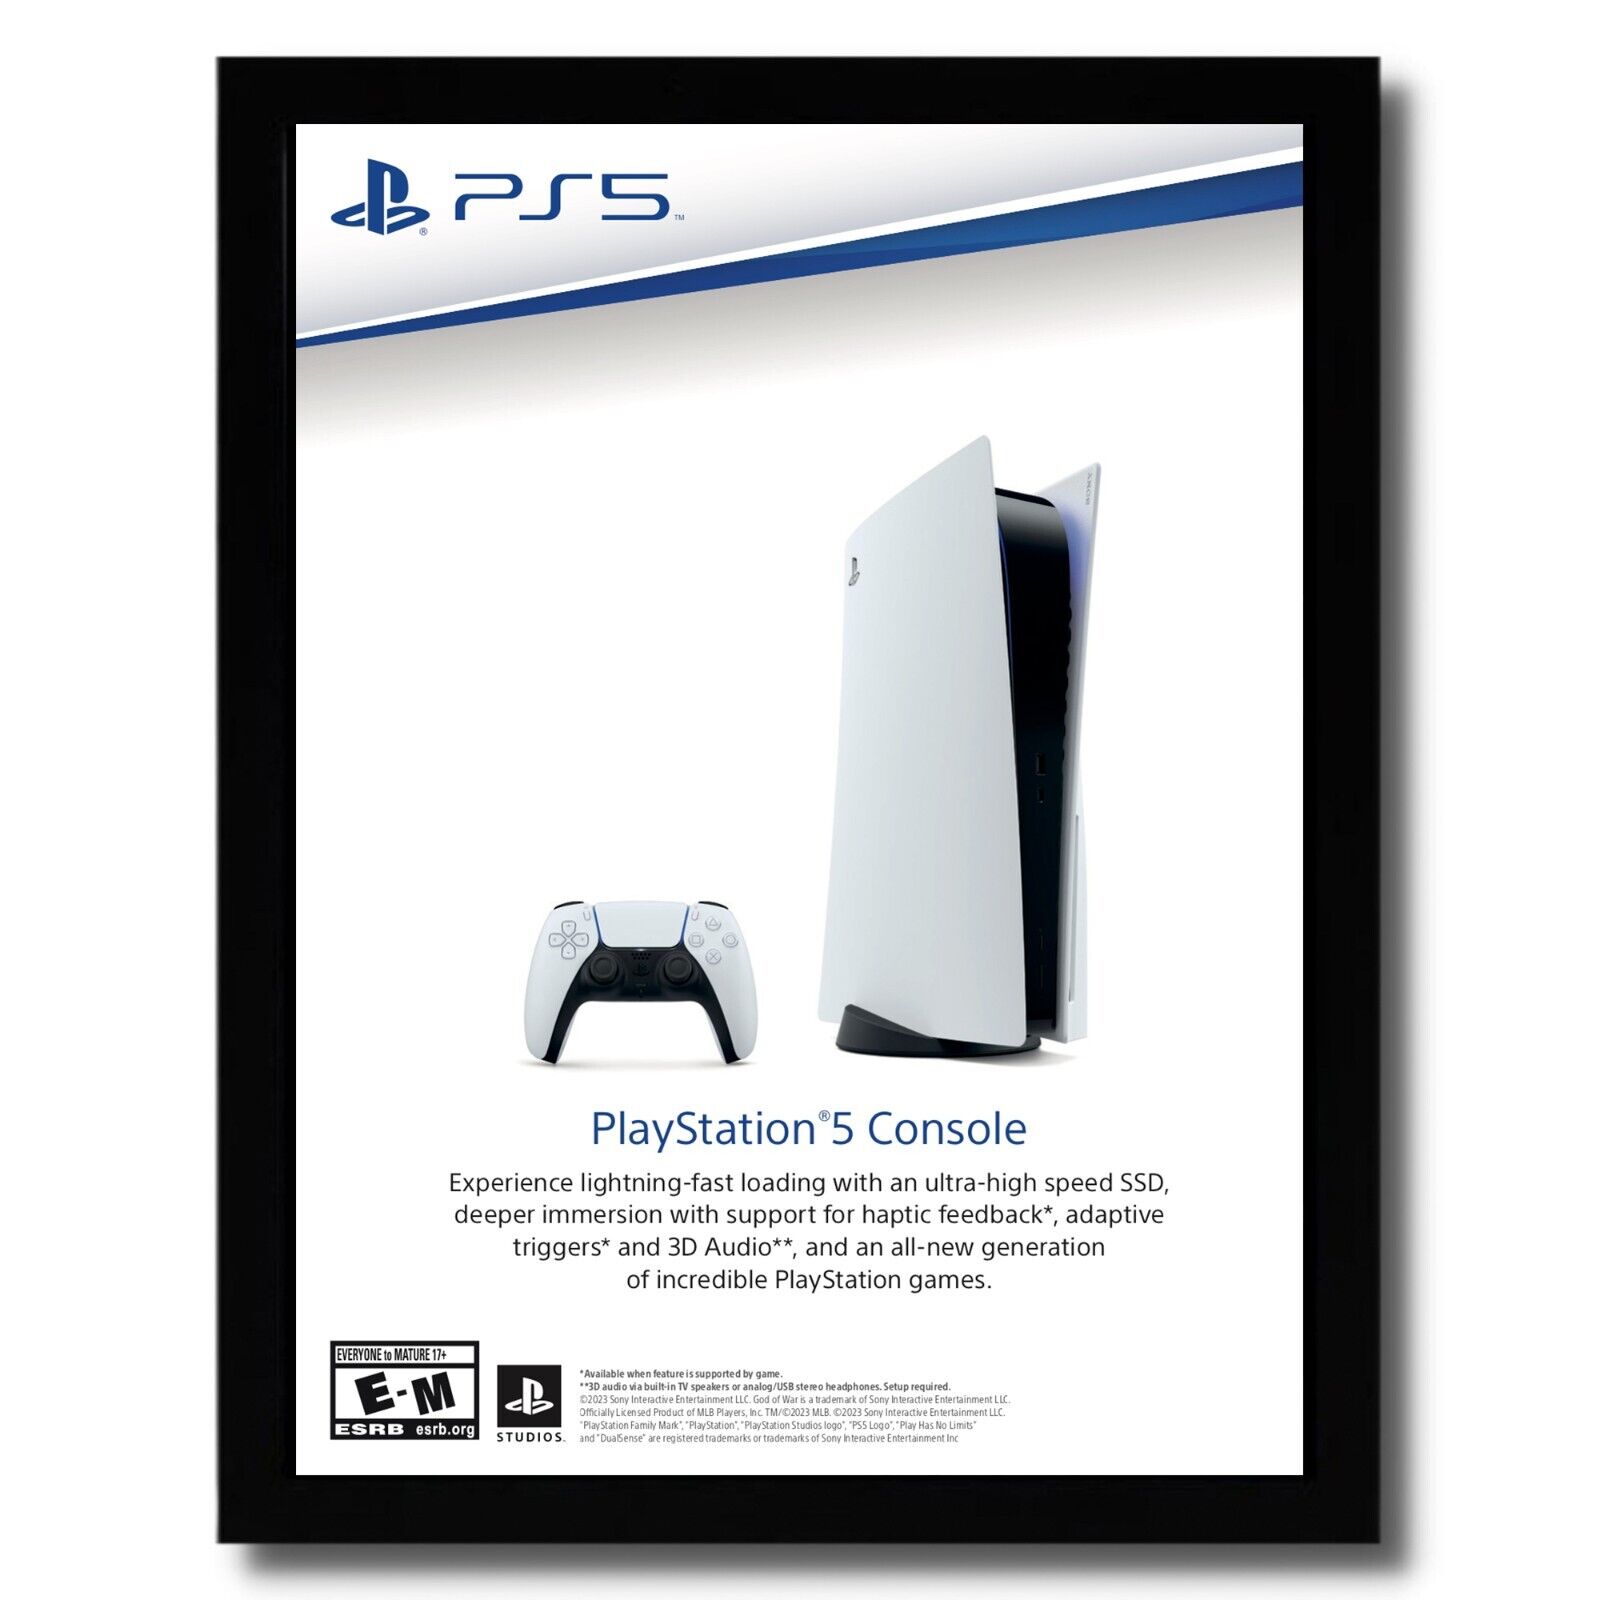 2023 PS5 Playstation 5 Console Launch Framed Print Ad/Poster Authentic Promo Art